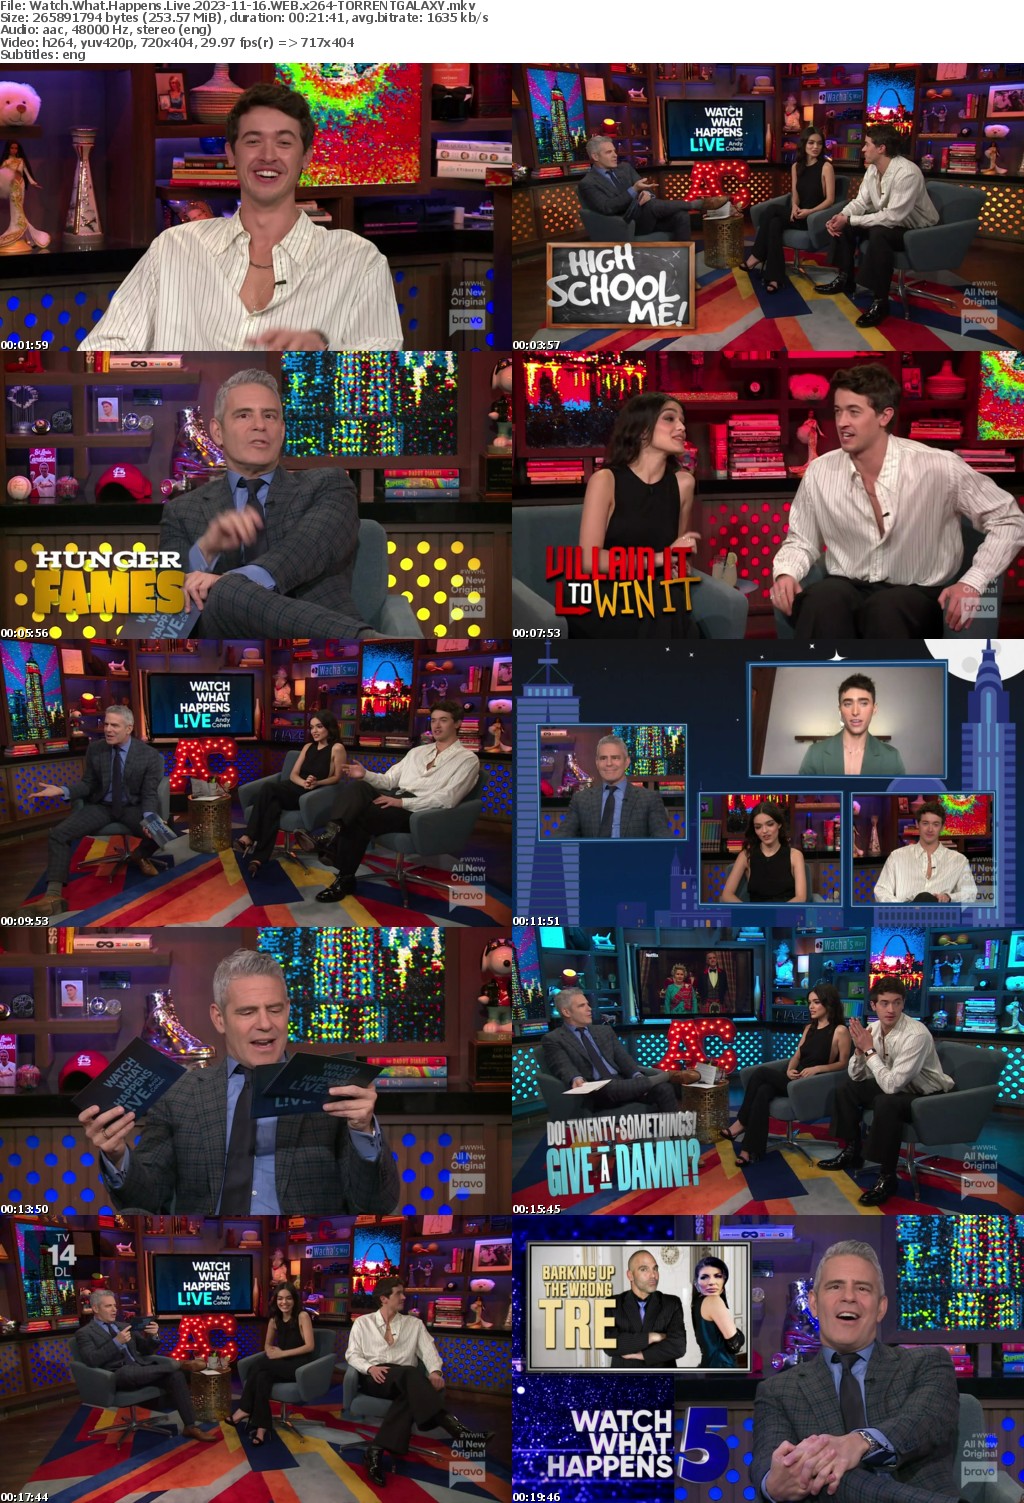 Watch What Happens Live 2023-11-16 WEB x264-GALAXY